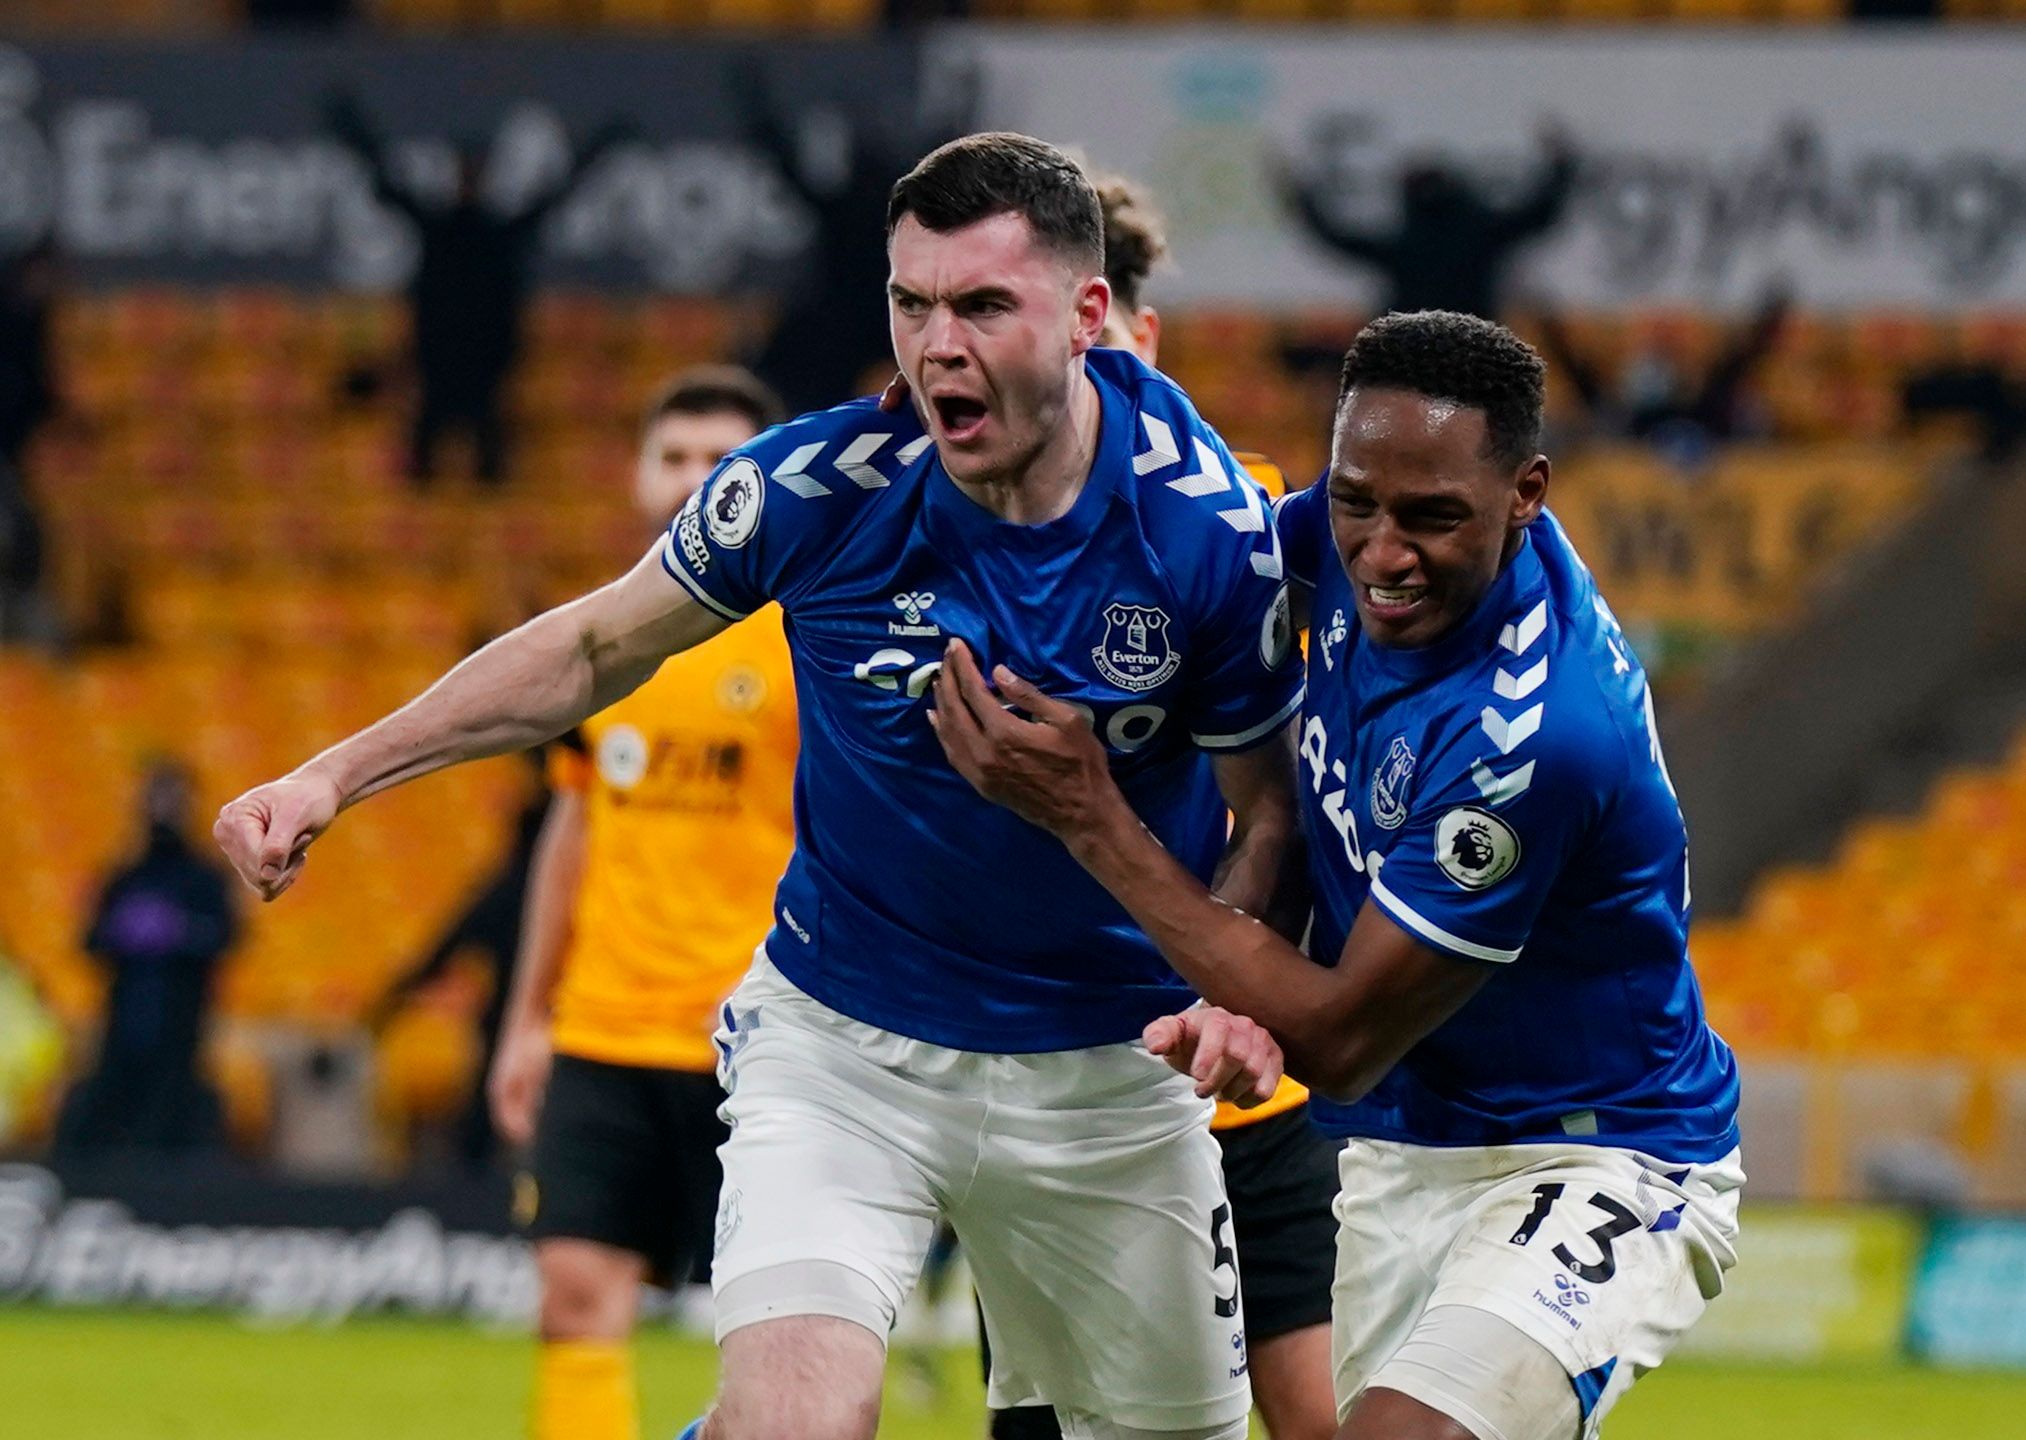 Soccer Football - Premier League - Wolverhampton Wanderers v Everton - Molineux Stadium, Wolverhampton, Britain - January 12, 2021 Everton's Michael Keane celebrates scoring their second goal with Yerry Mina Pool via REUTERS/Tim Keeton EDITORIAL USE ONLY. No use with unauthorized audio, video, data, fixture lists, club/league logos or 'live' services. Online in-match use limited to 75 images, no video emulation. No use in betting, games or single club /league/player publications.  Please contact